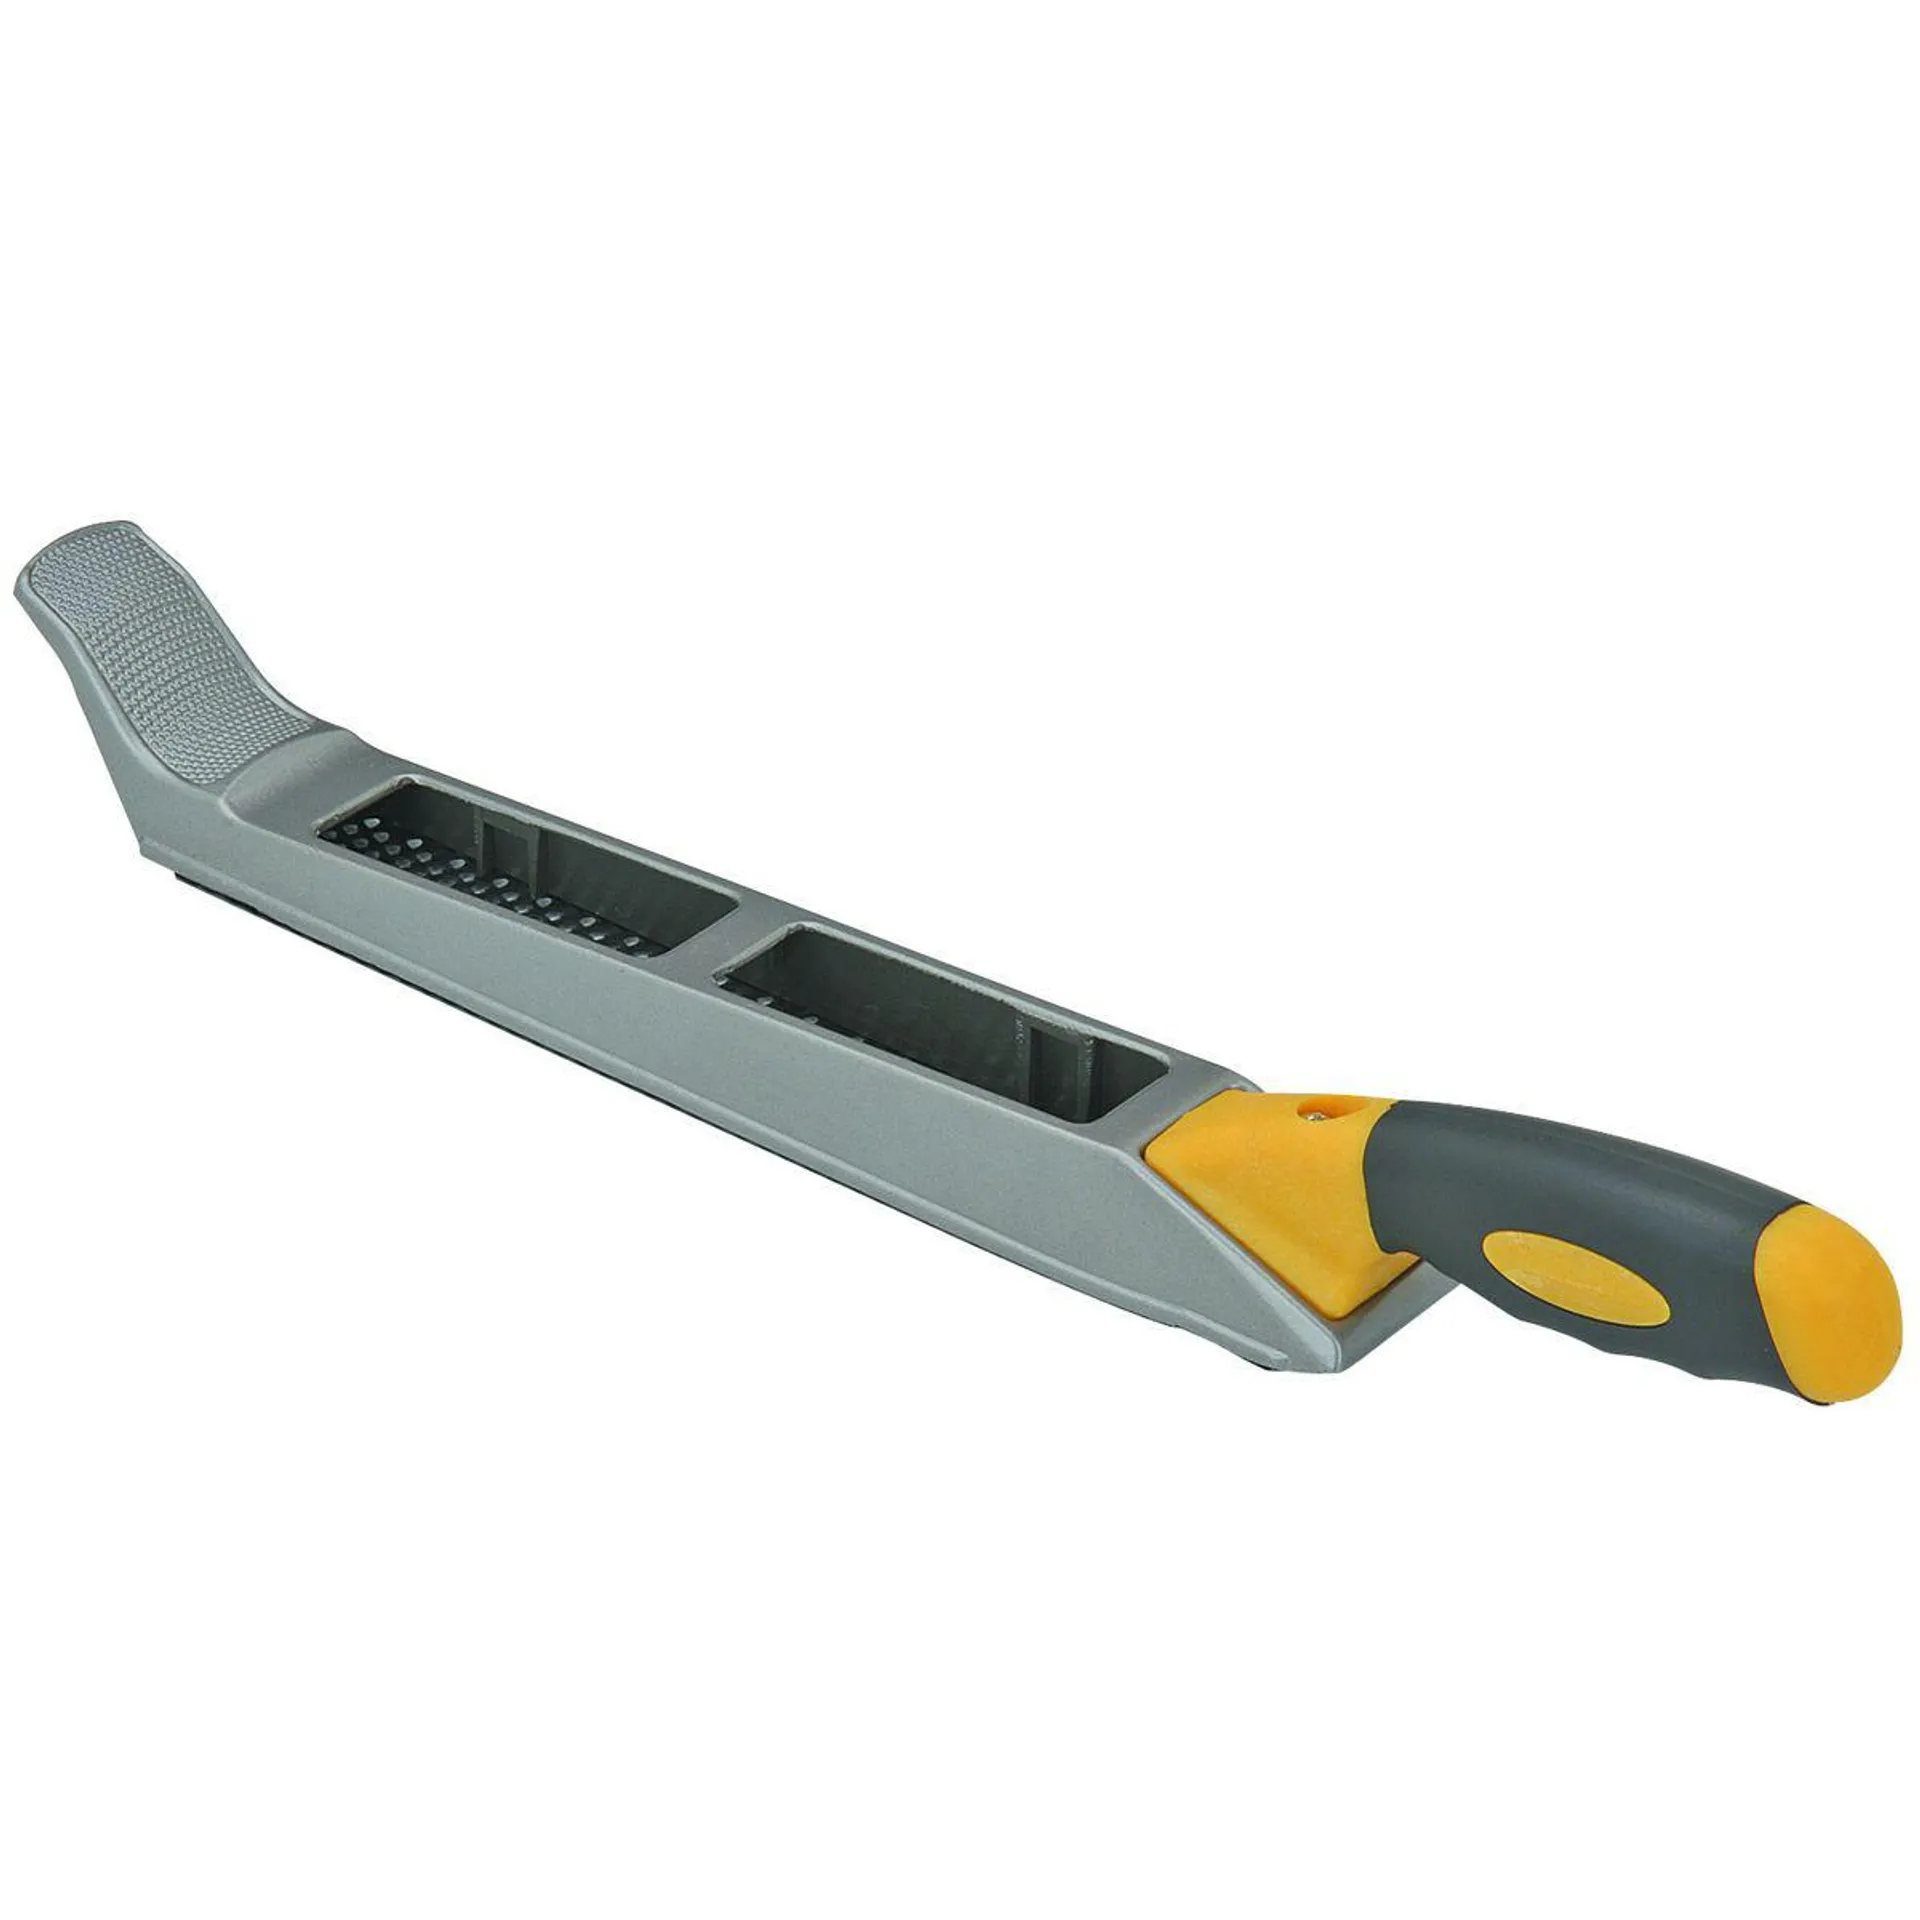 10 in. Two-Way Combination Rasp Plane